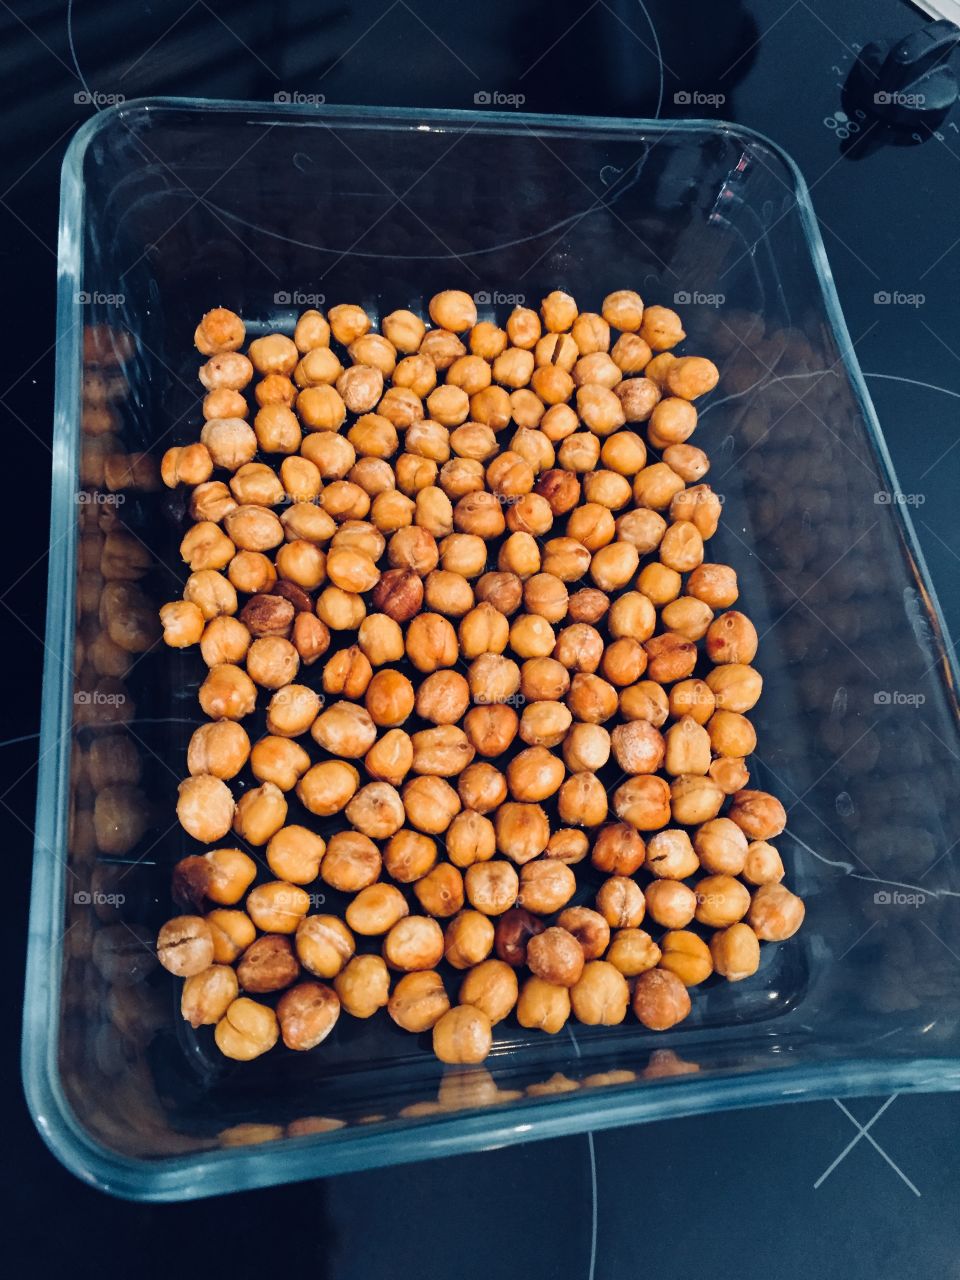 Roasted chickpeas in a glass bowl, homemade 